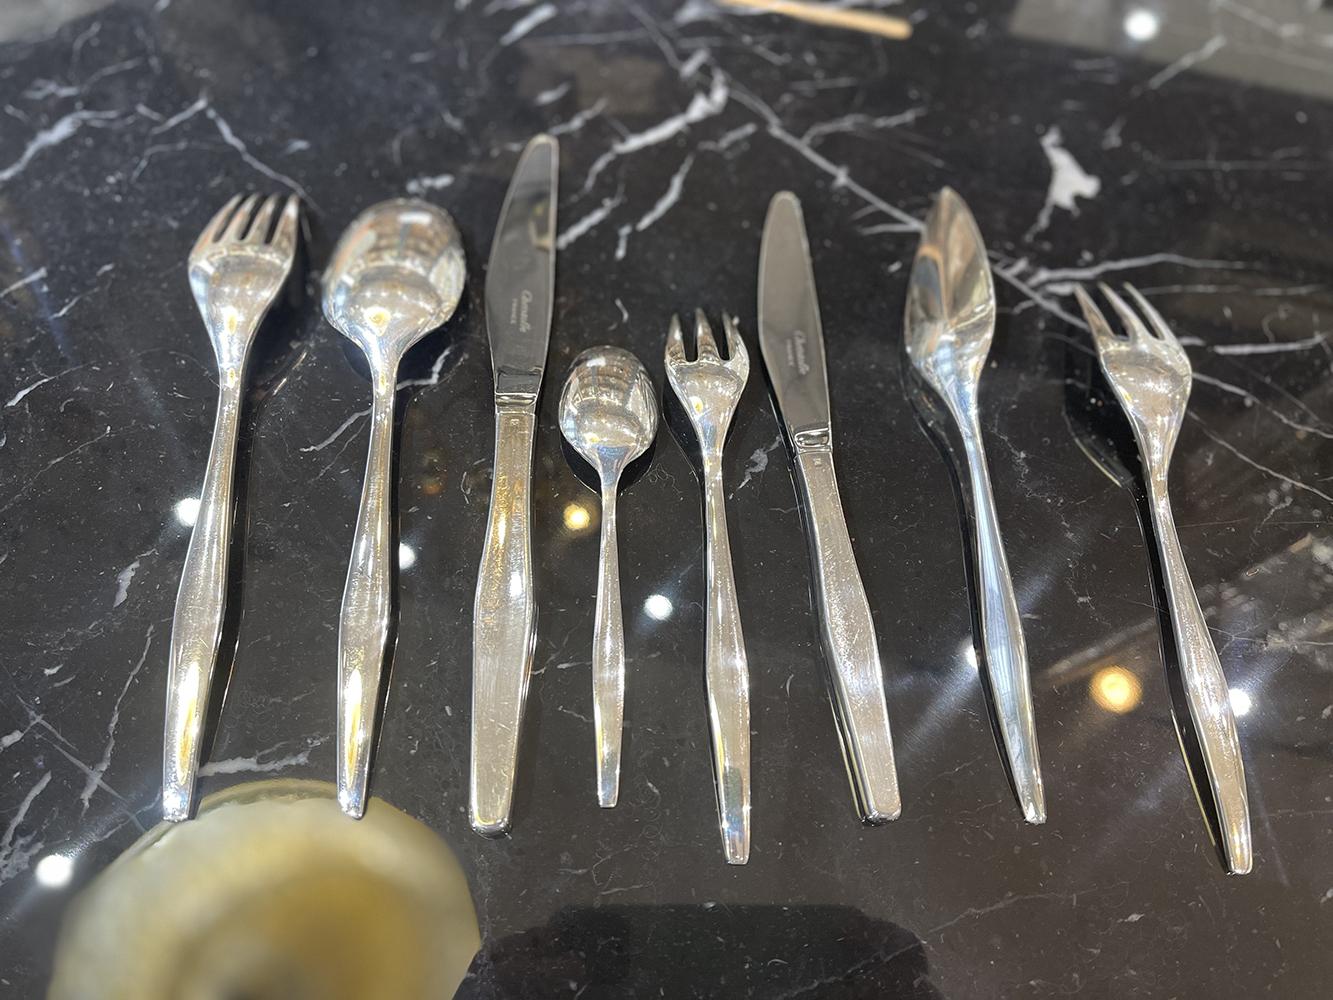 Orly christofle cutlery set 95 pieces and including:

- 12 forks and 12 table spoons
- 12 table knives,
- 8 fish cutlery, i.e. 8 forks and 8 knives
- 12 dessert forks
- 12 coffee spoons
- 12 dessert knives

7 serving pieces: sugar tongs,